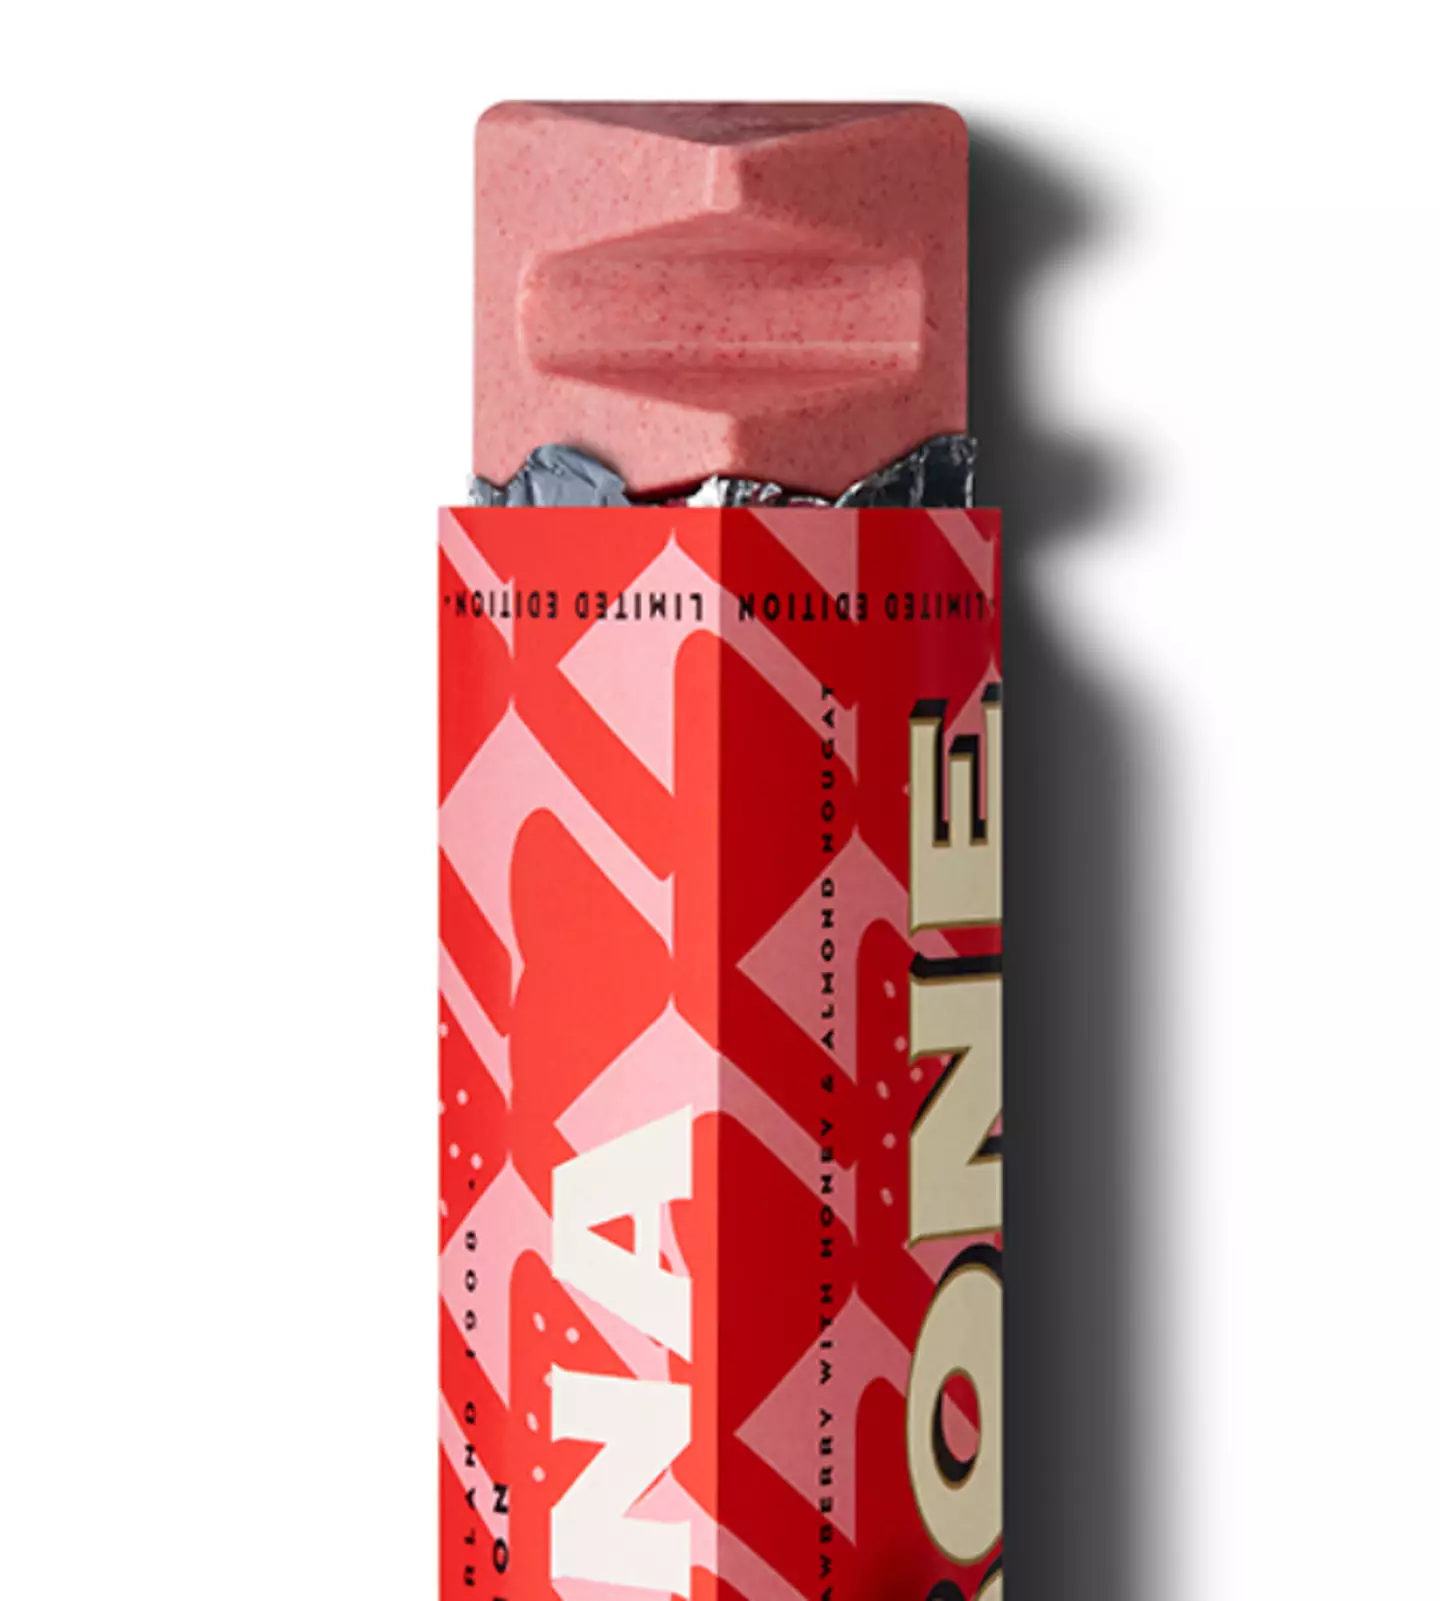 Toblerone have launched a limited edition pink chocolate bar for Valentine's Day.